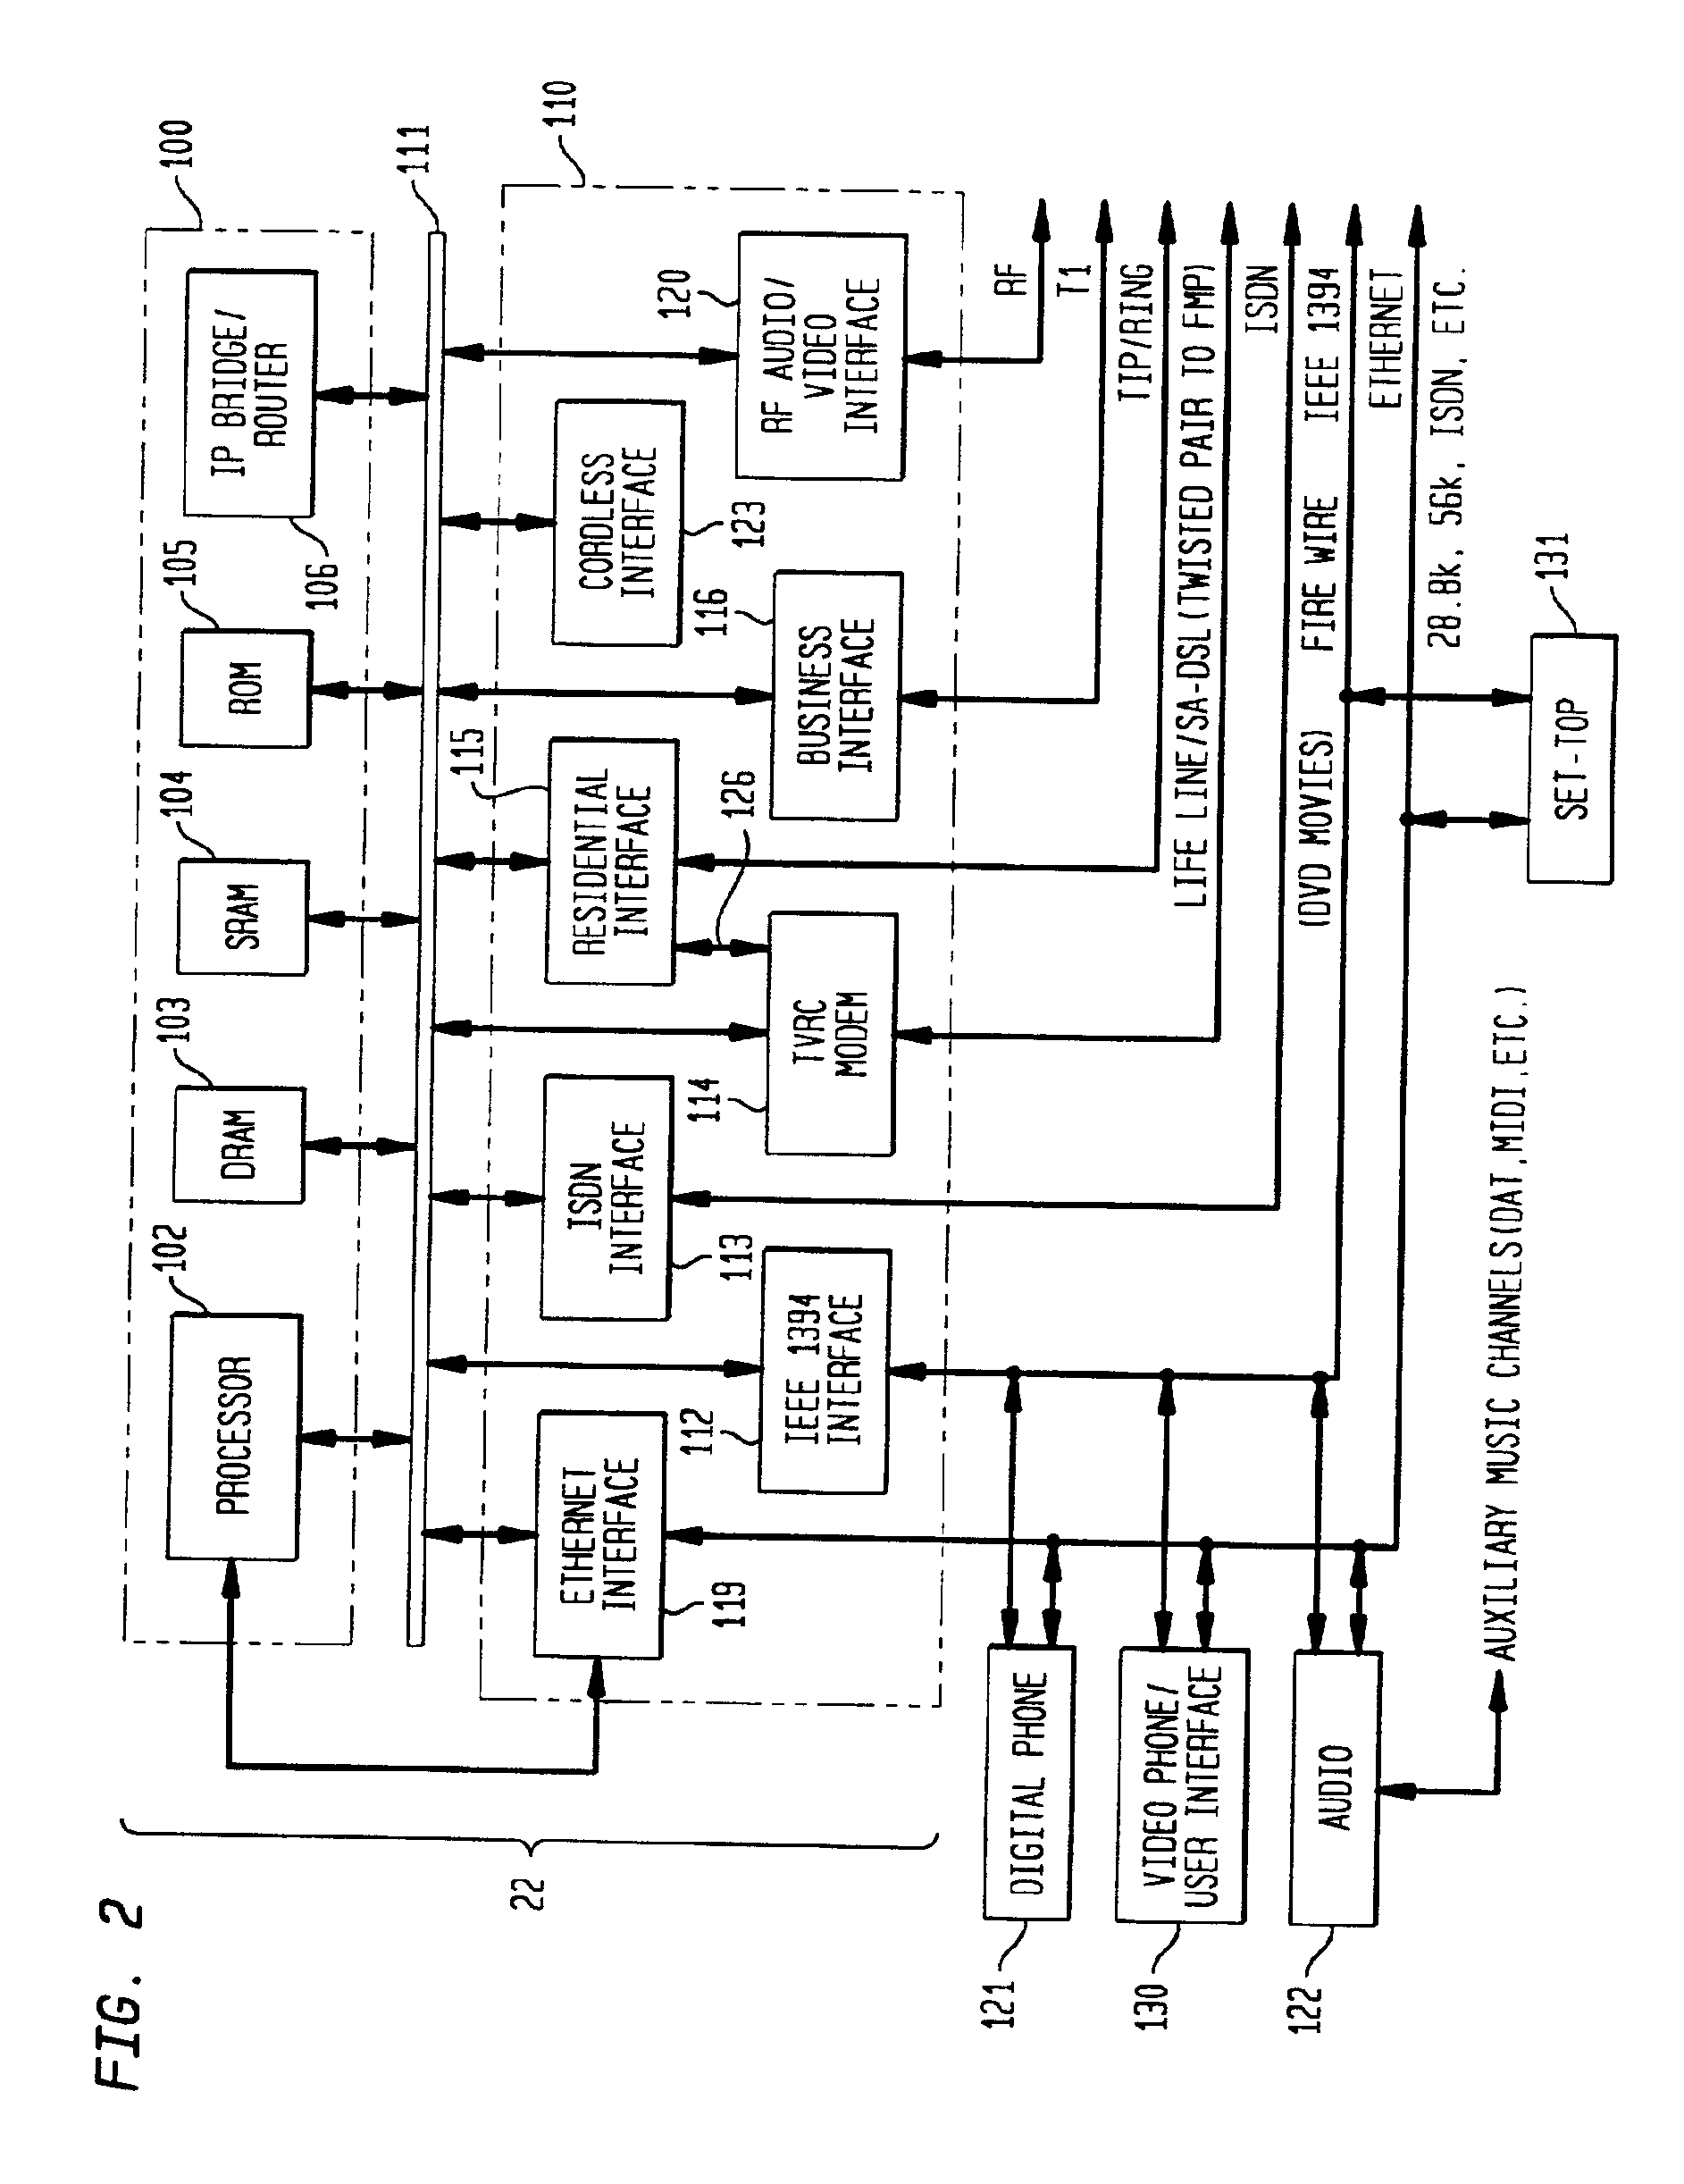 Multifunction interface facility connecting wideband multiple access subscriber loops with various networks